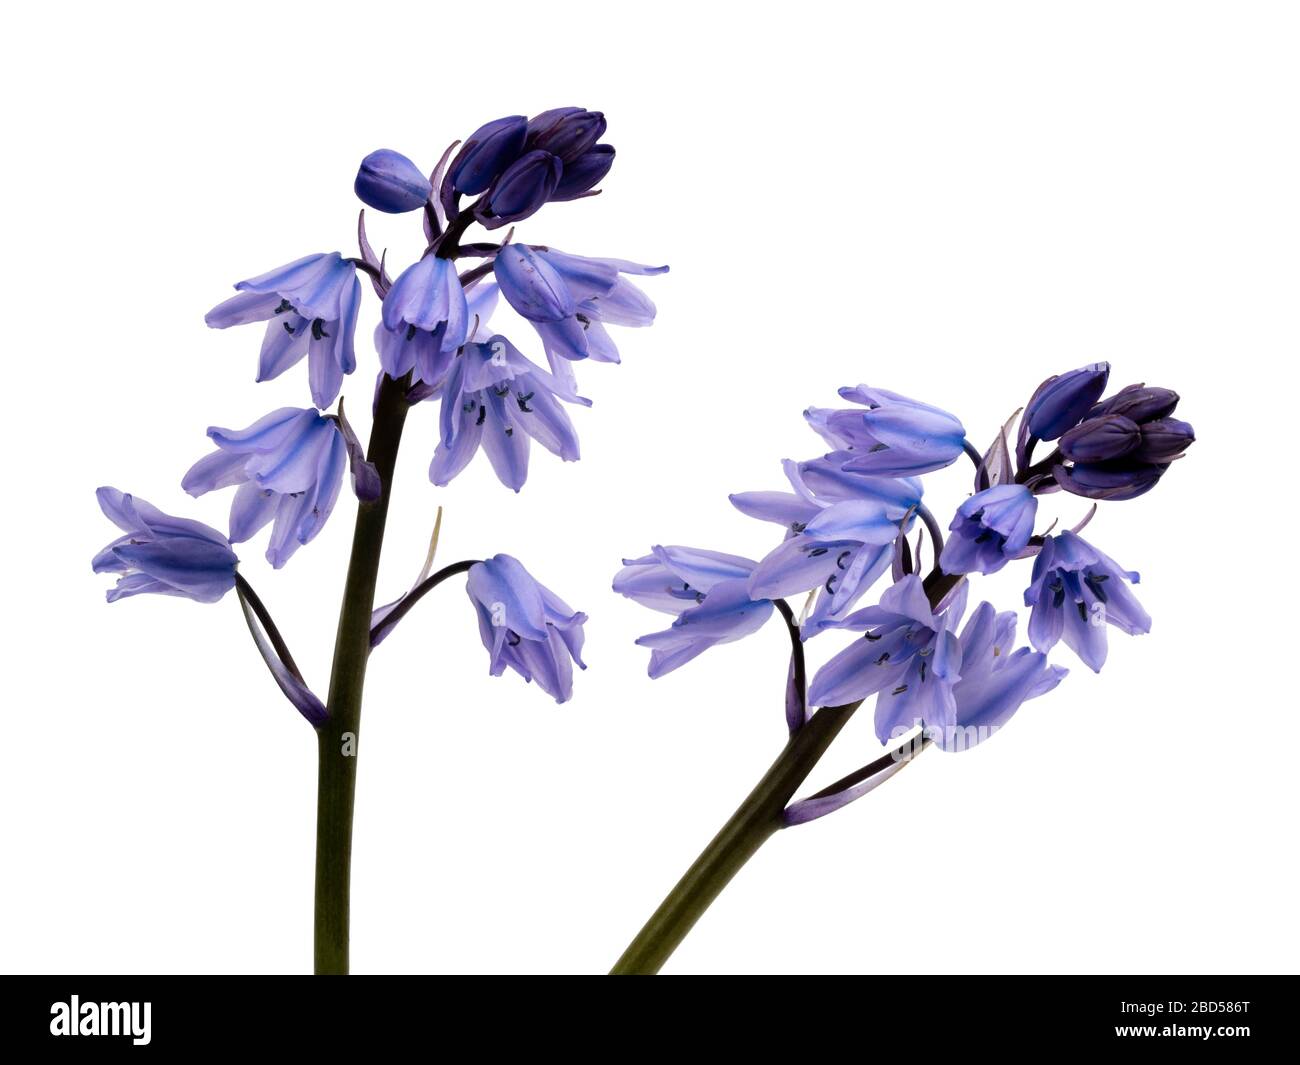 Blue anthered white and blue striped spring flowers of the Spanish bluebell, Hyacinthoides hispanica, on a white background Stock Photo